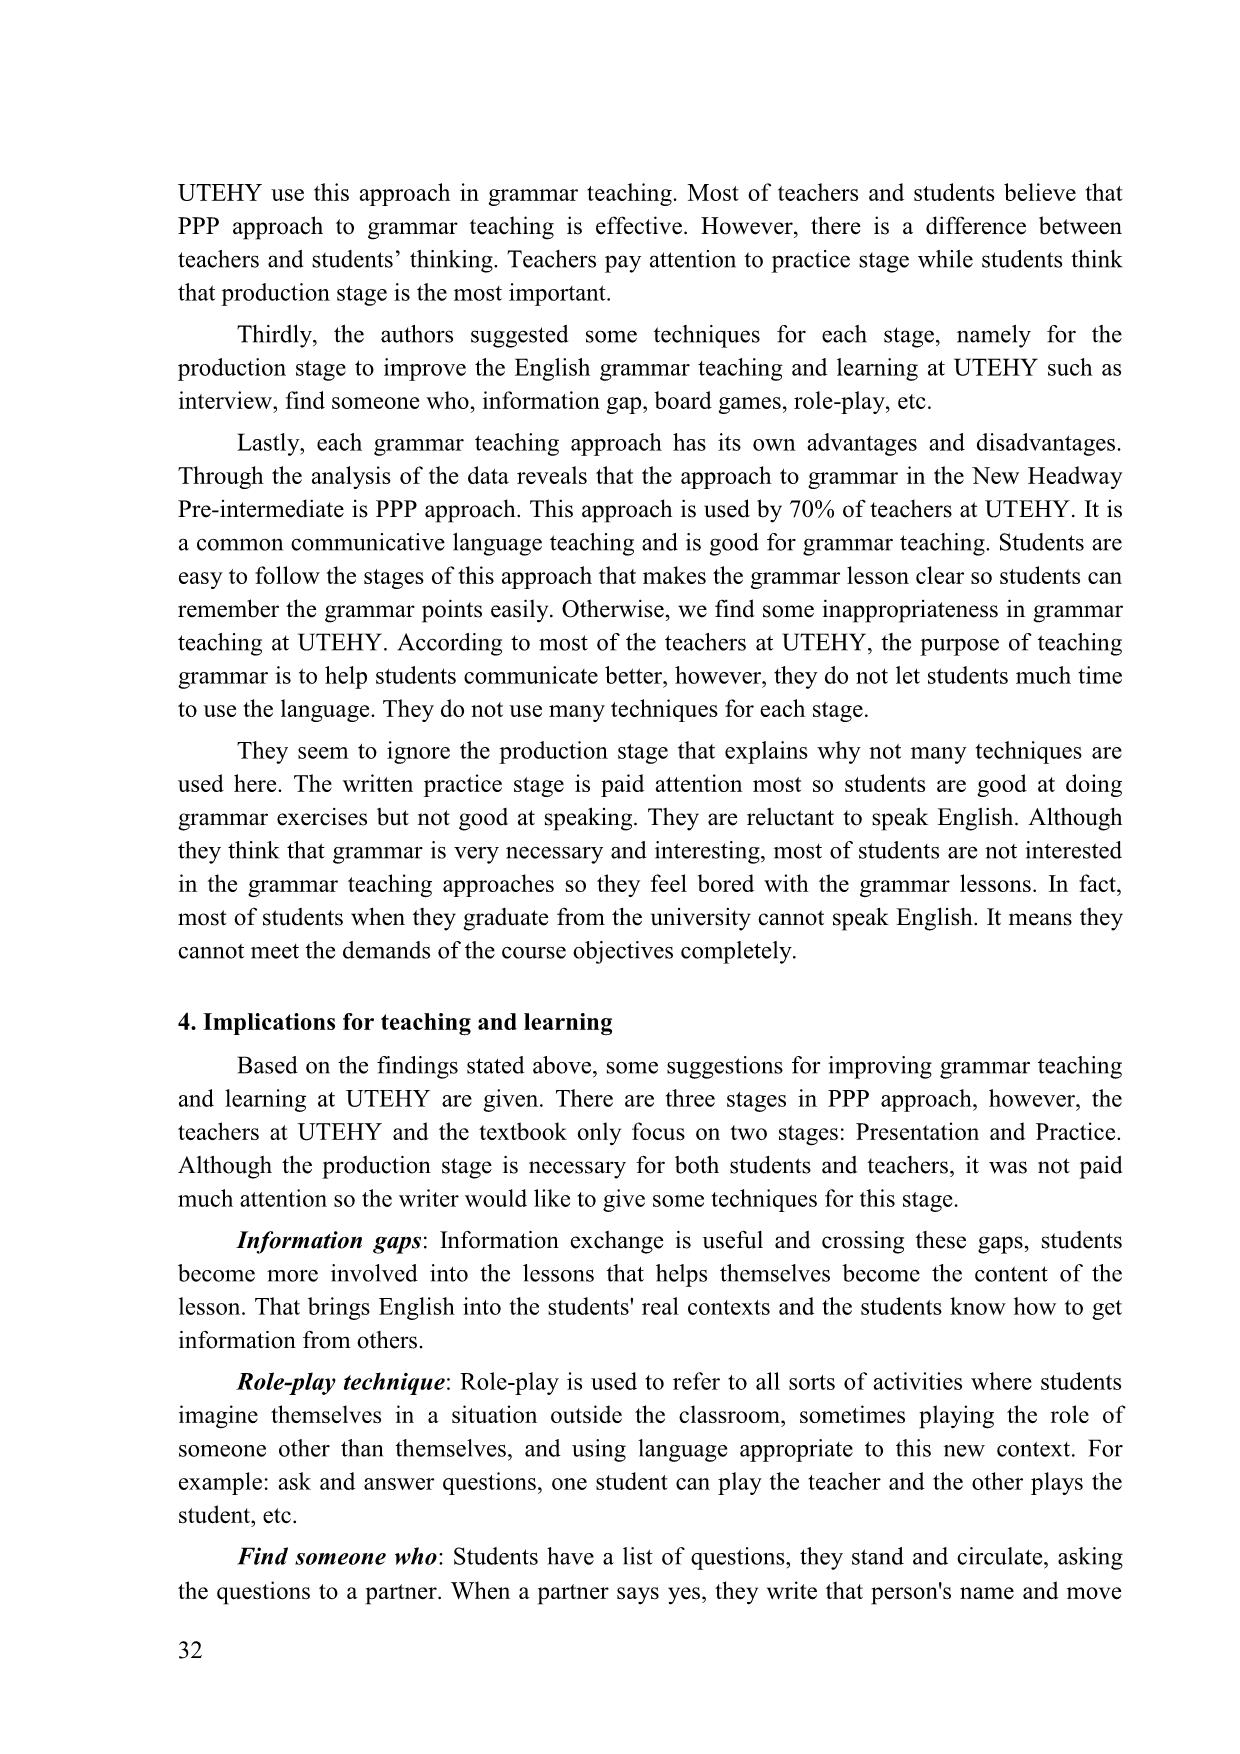 An analysis on grammar approach in the textbook new headway pre-Intermediate and implications for teaching and learning. A cacse study in the department of chemistry and environment of Hung Yen universityof technology and education trang 7